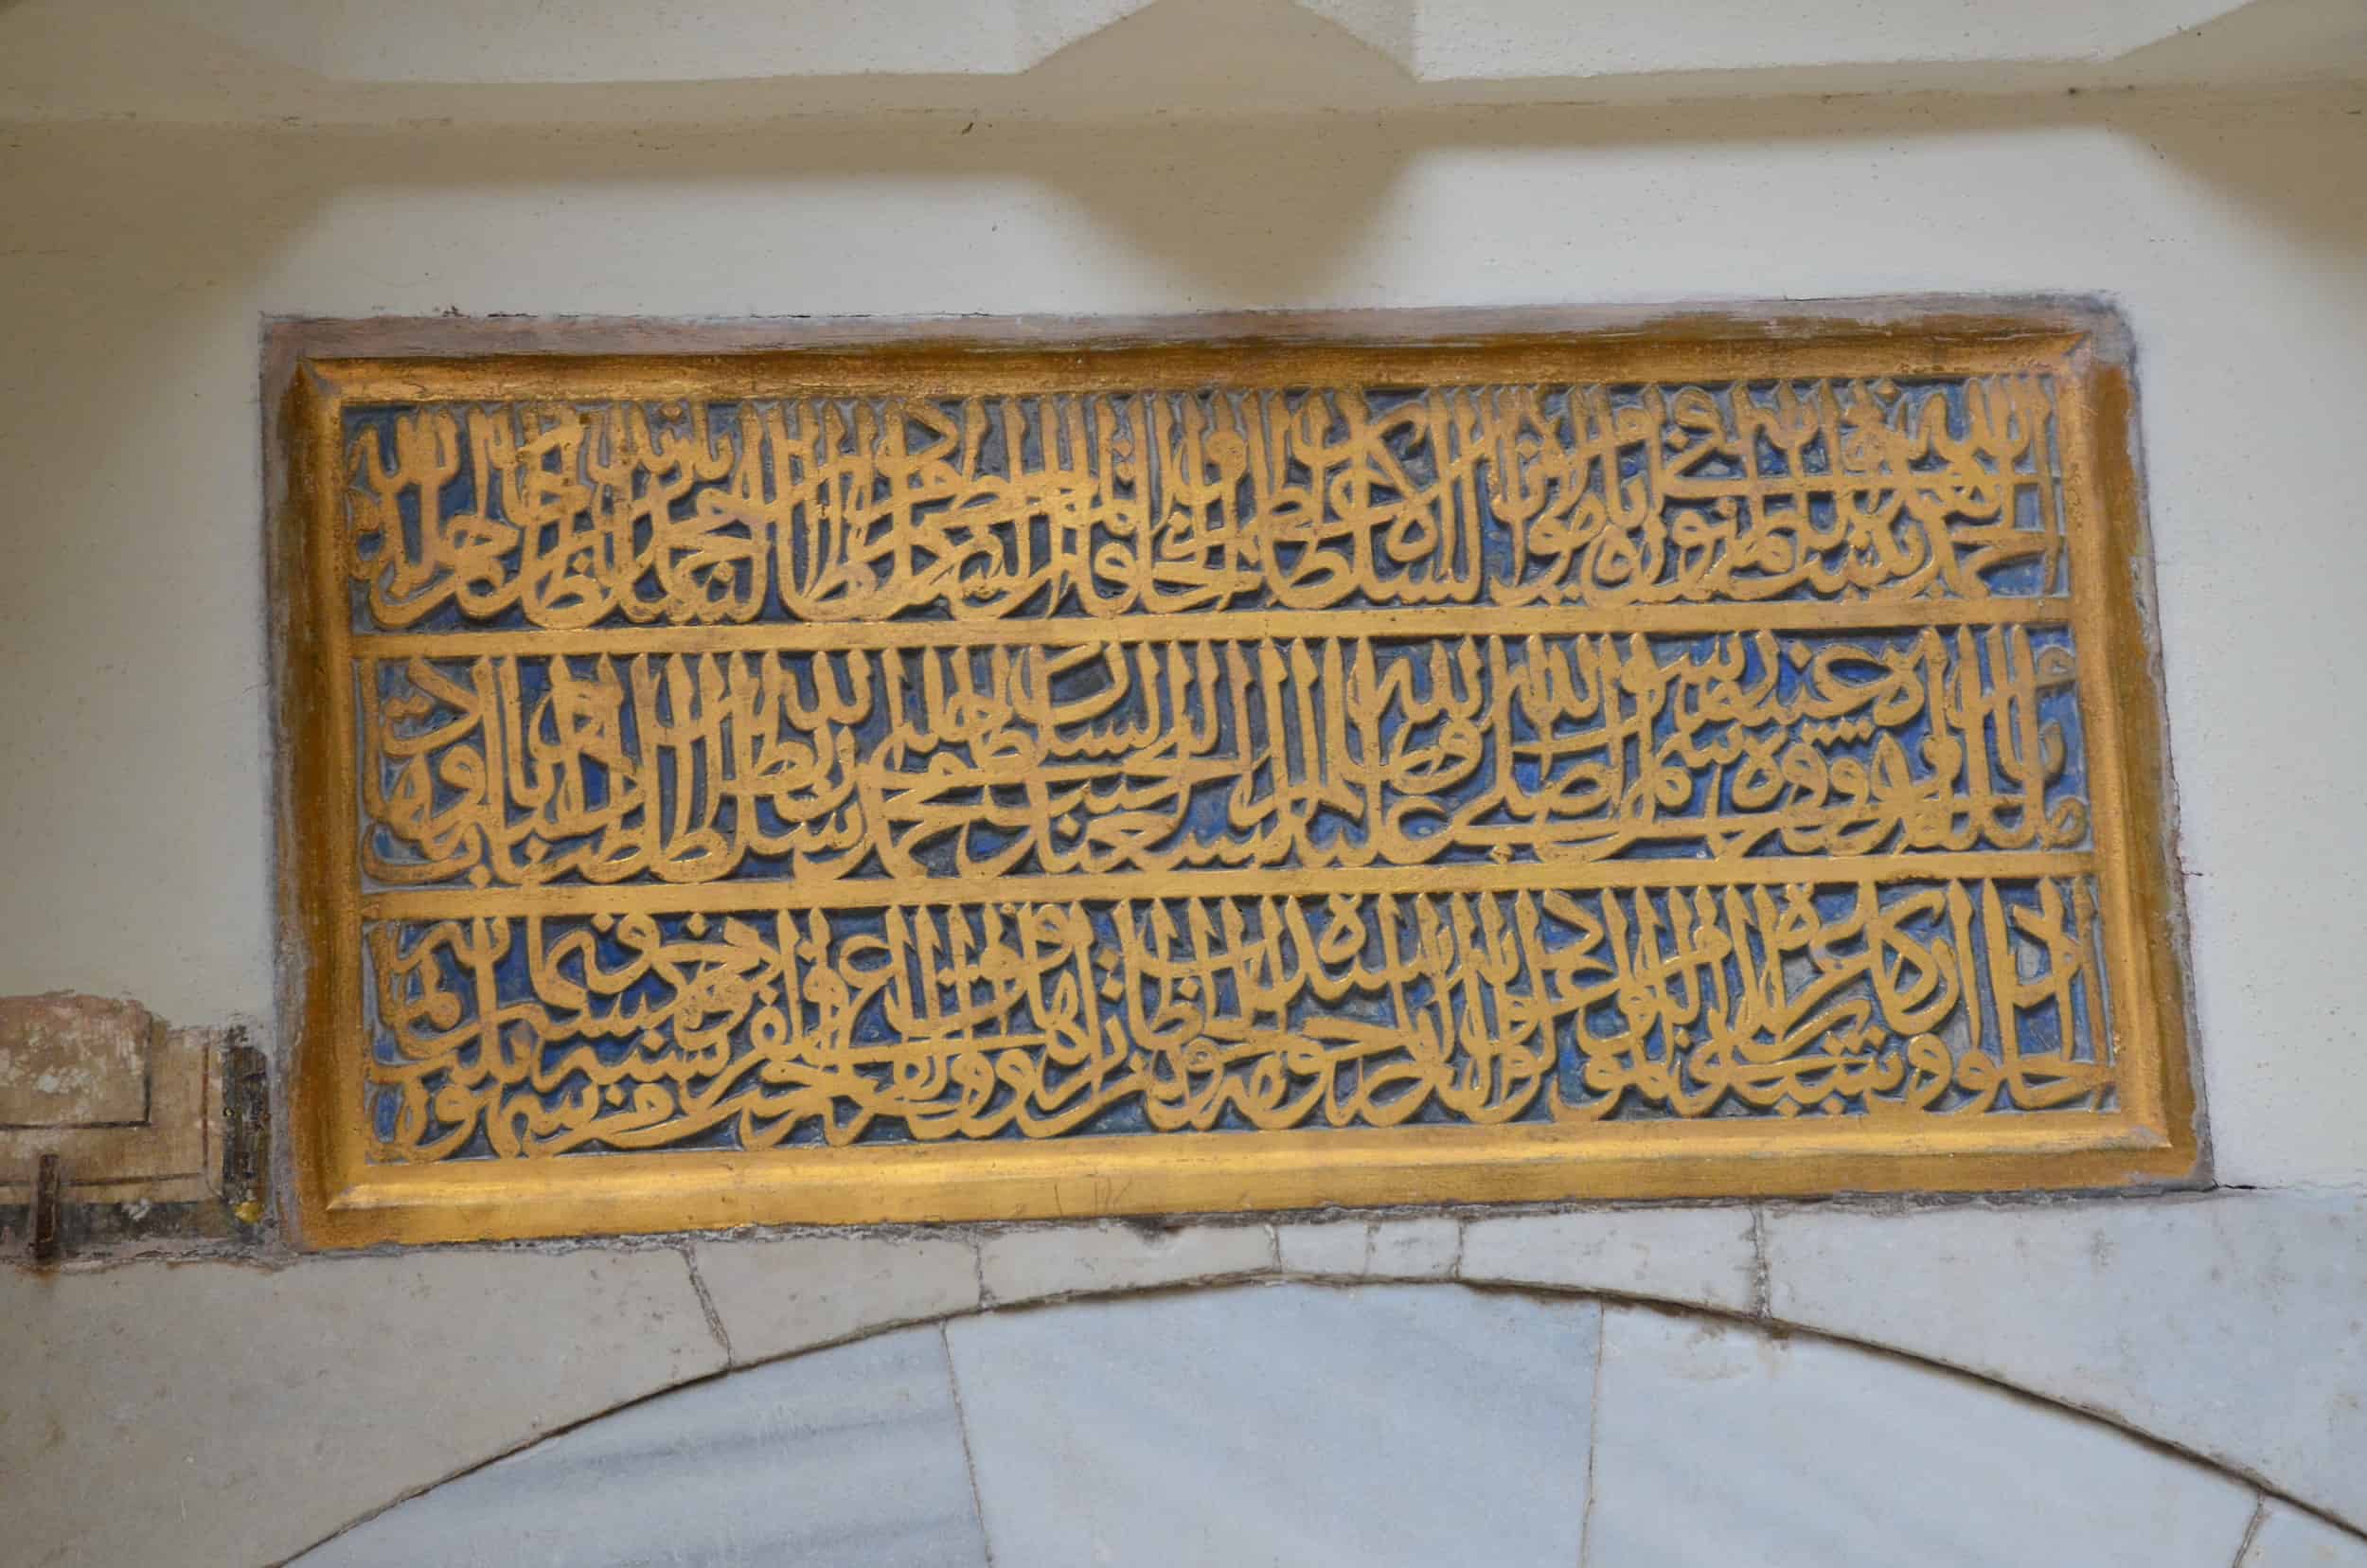 Inscription above the entrance to the Tomb of Hüma Hatun